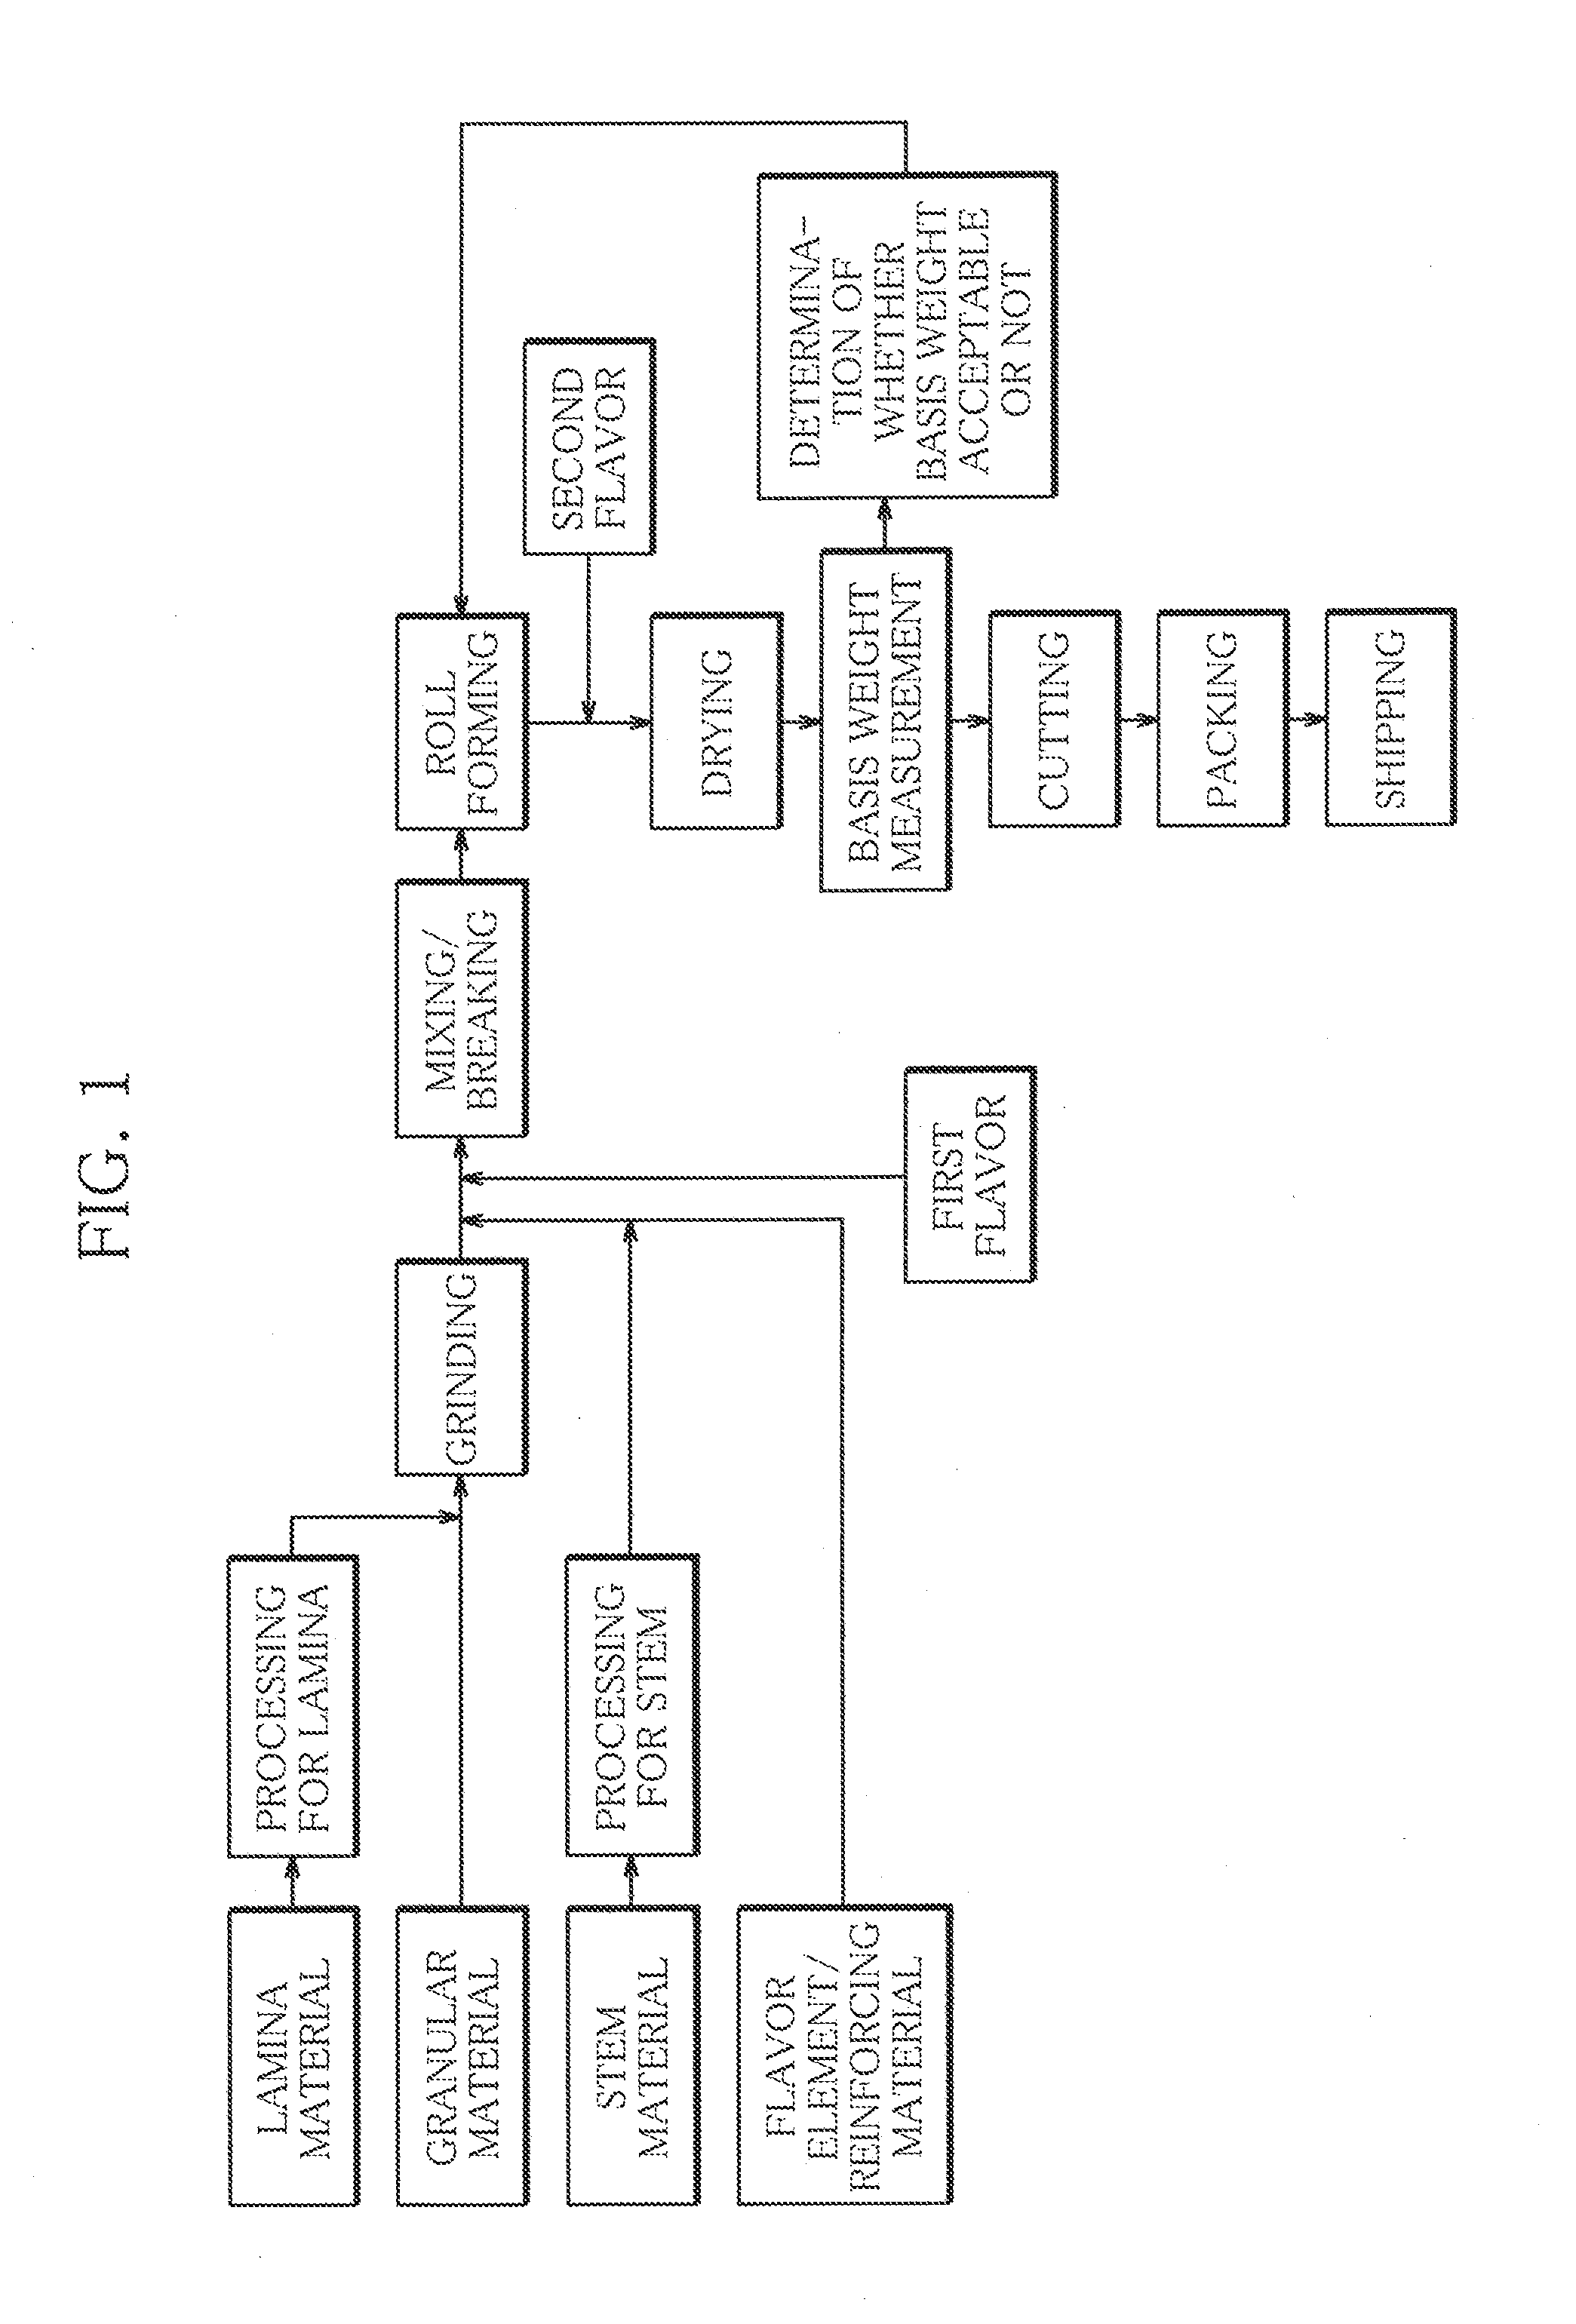 Basis weight measuring apparatus and method for sheet tobacco, and manufacturing system and method for sheet tobacco